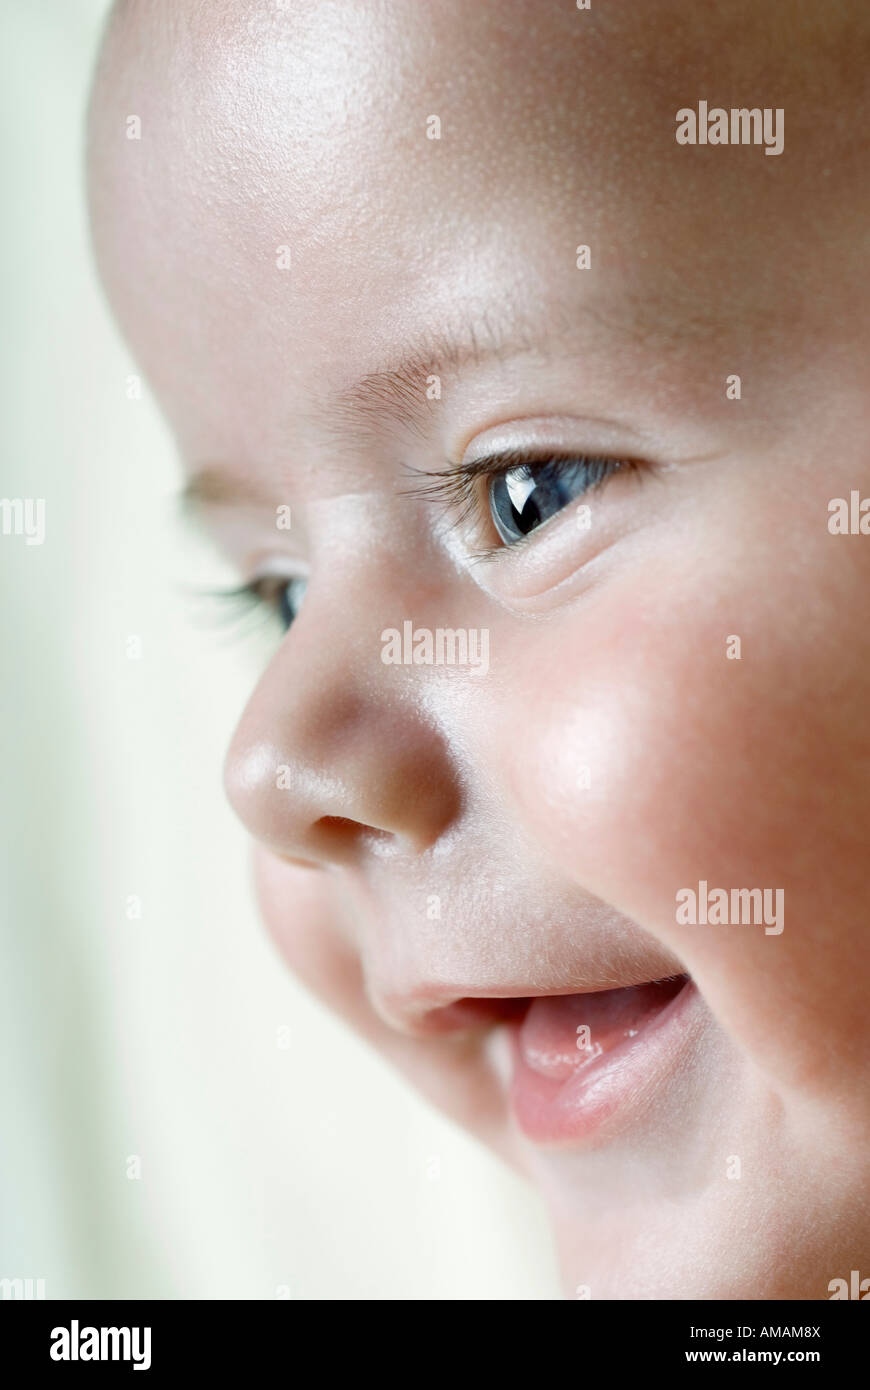 Side view of a baby smiling Stock Photo